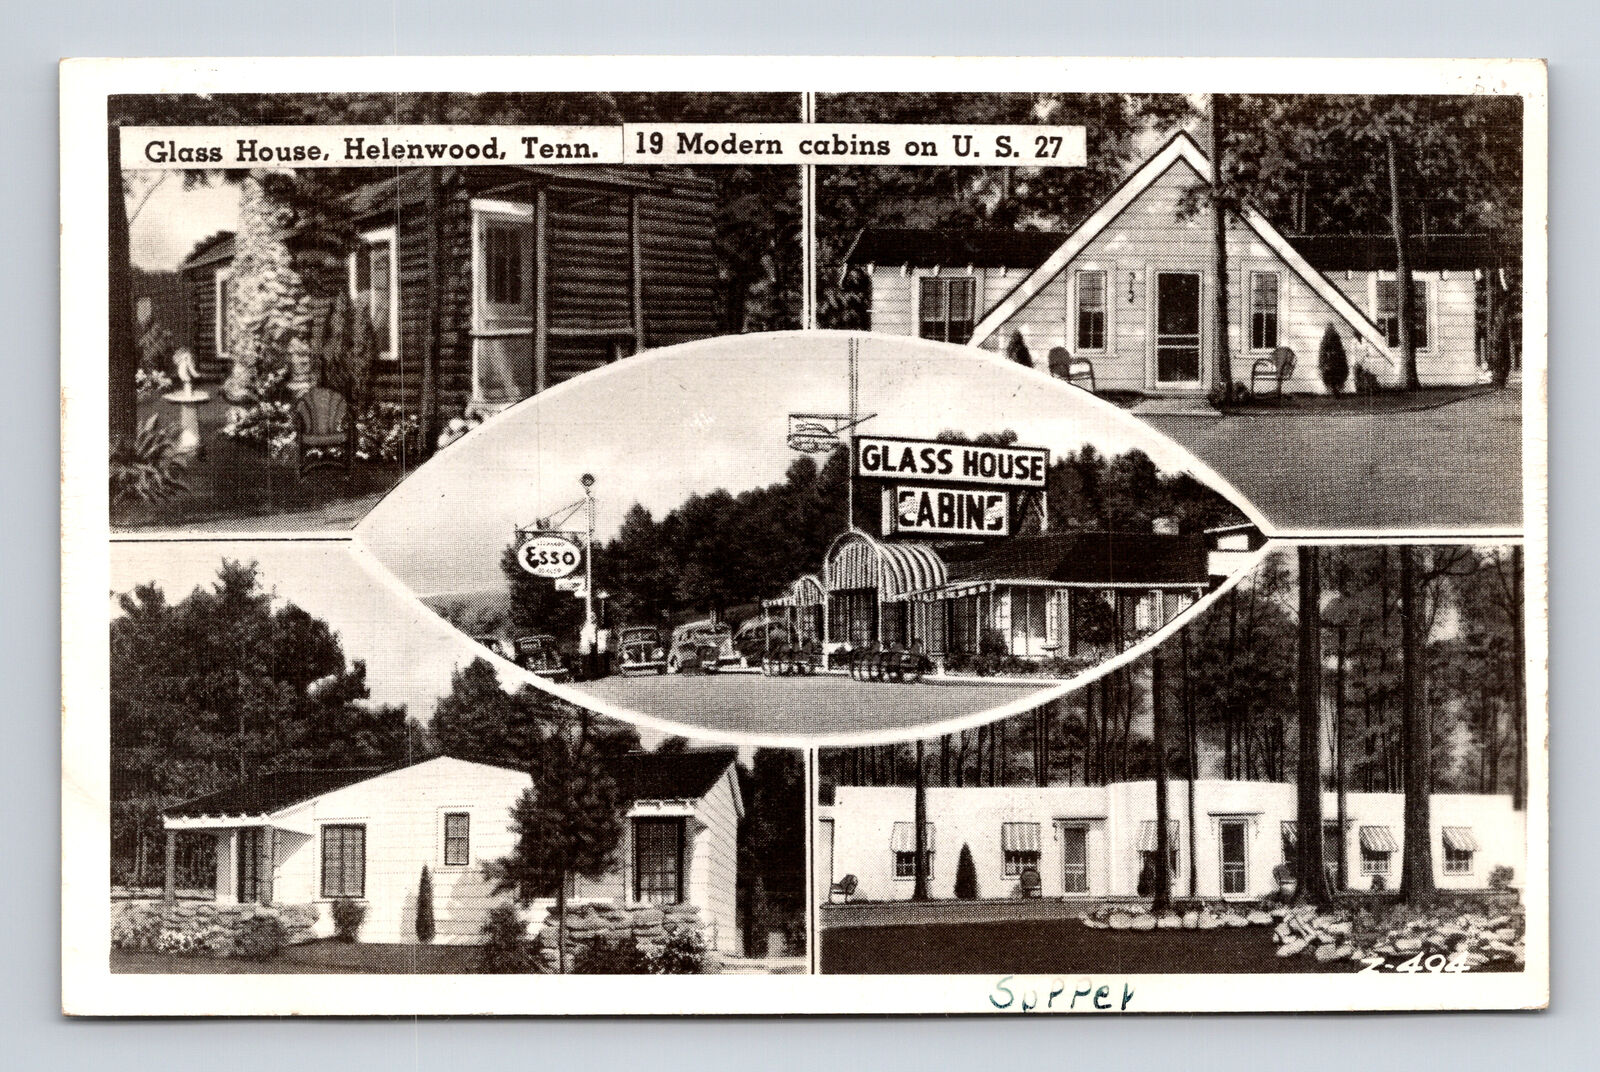 c1952 Glass House Cabins Motel Esso Gas Helenwood Tennessee TN Postcard